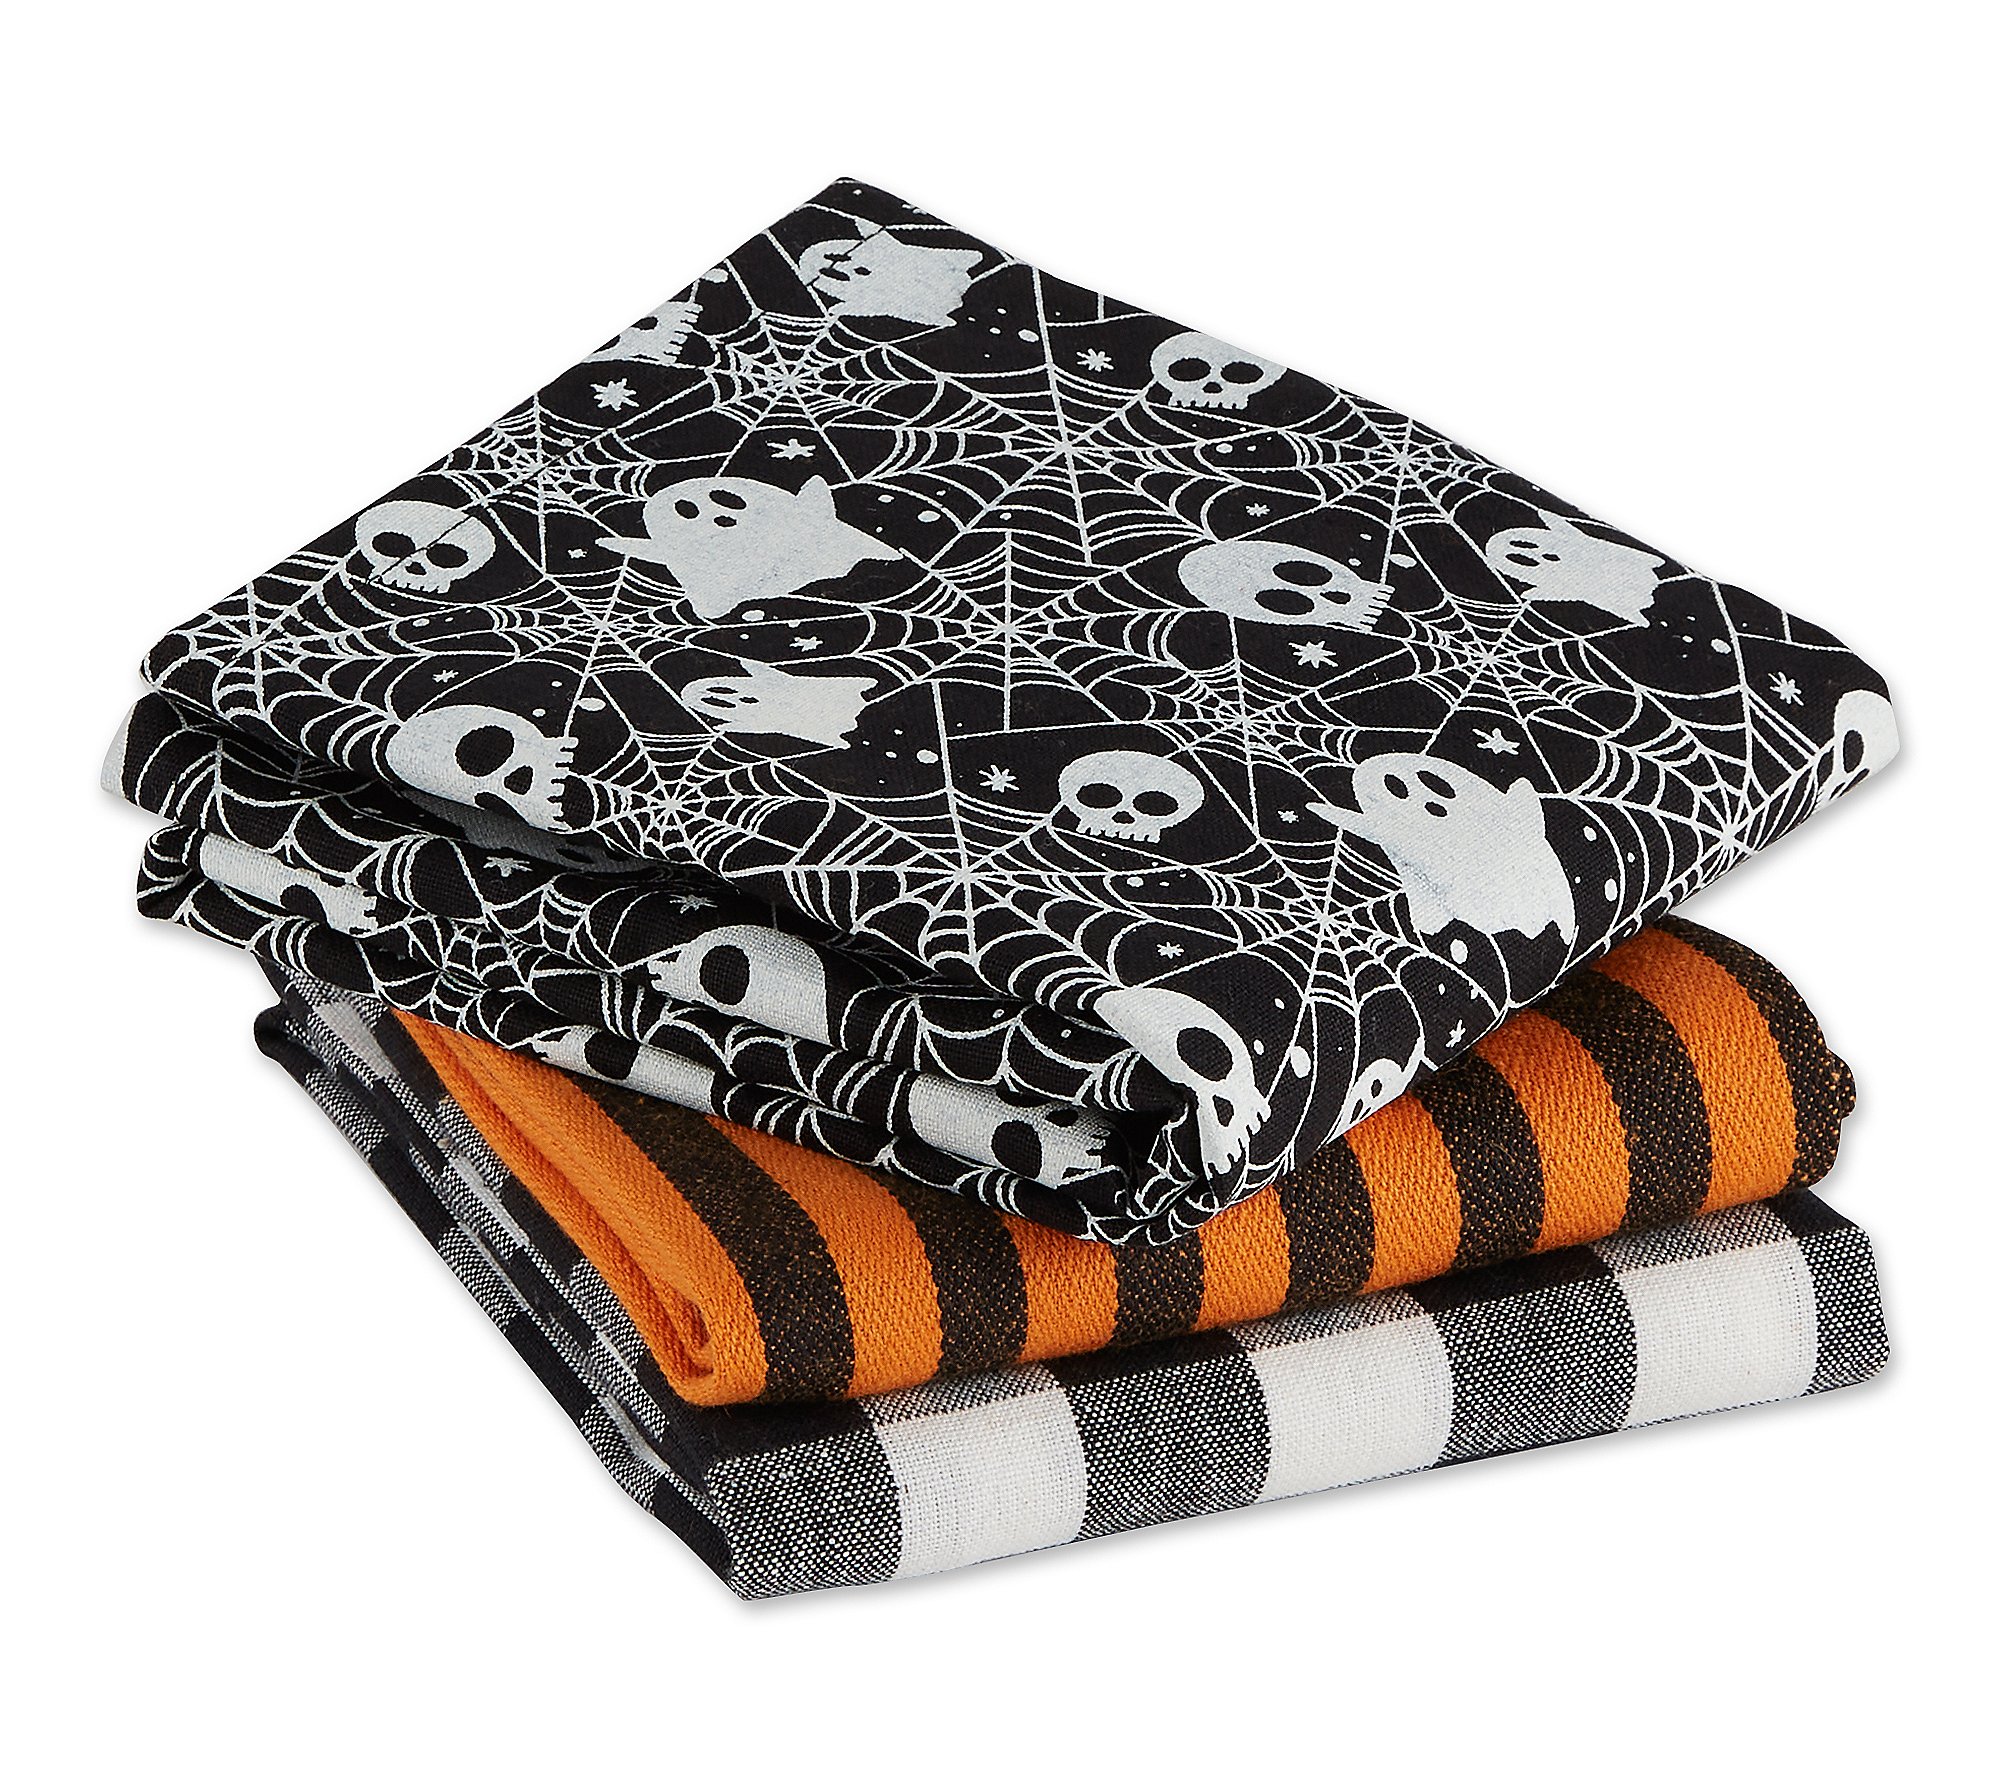 Design Imports Set of 3 Haunted Objects Kitchen Towels